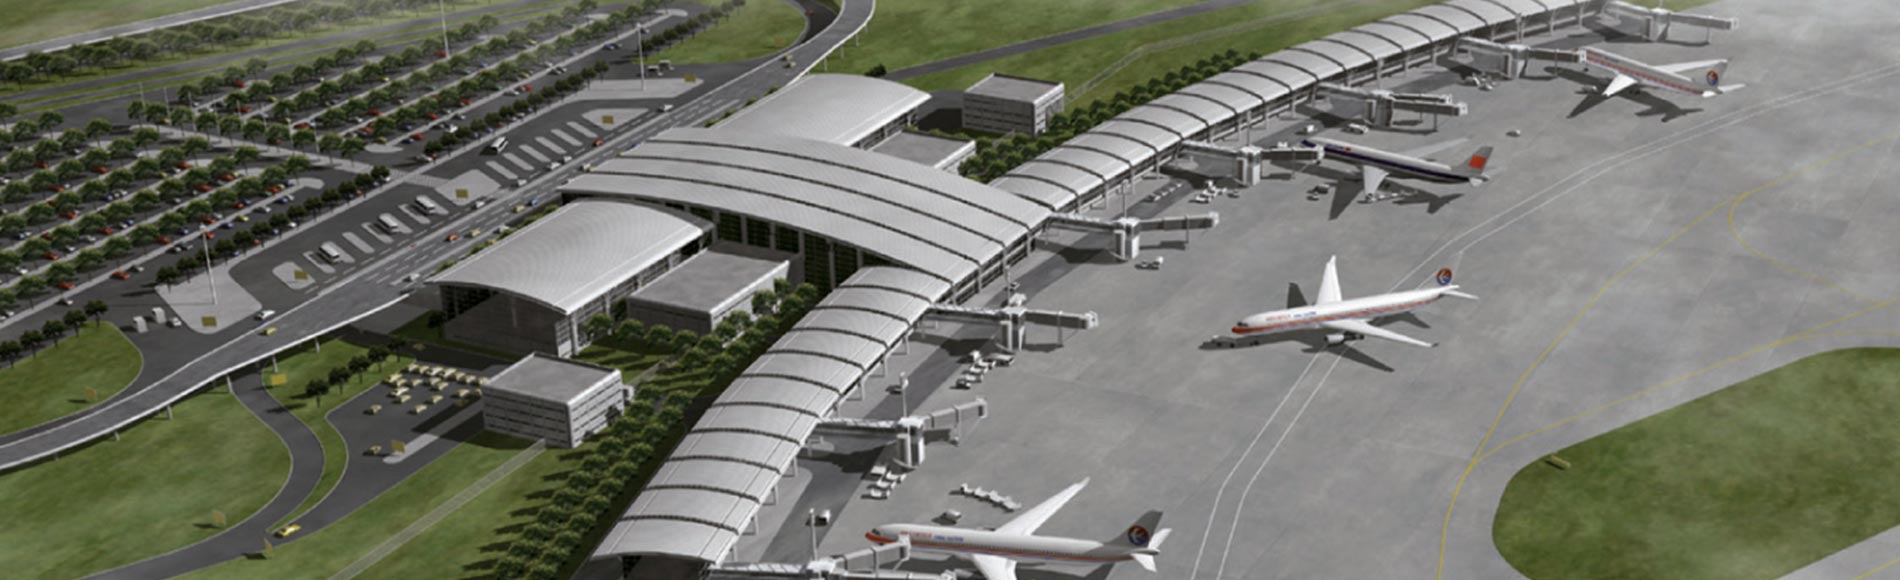 Soon a new airport to match the ambitions of the ZFN